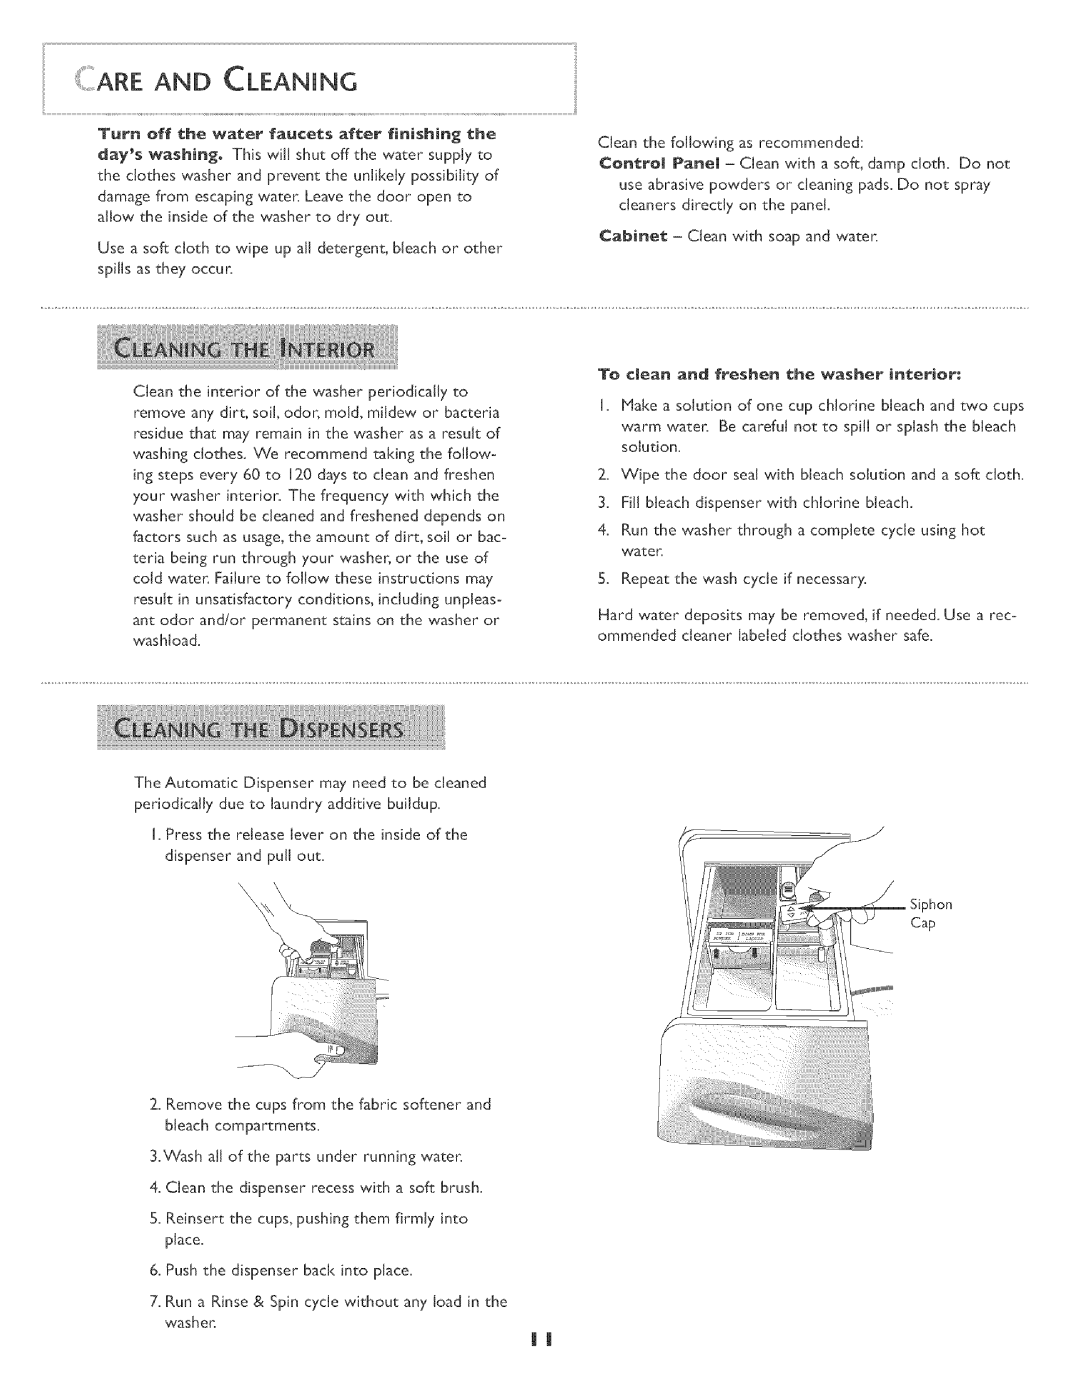 Maytag MAH-3 operating instructions Are And Cleanung 